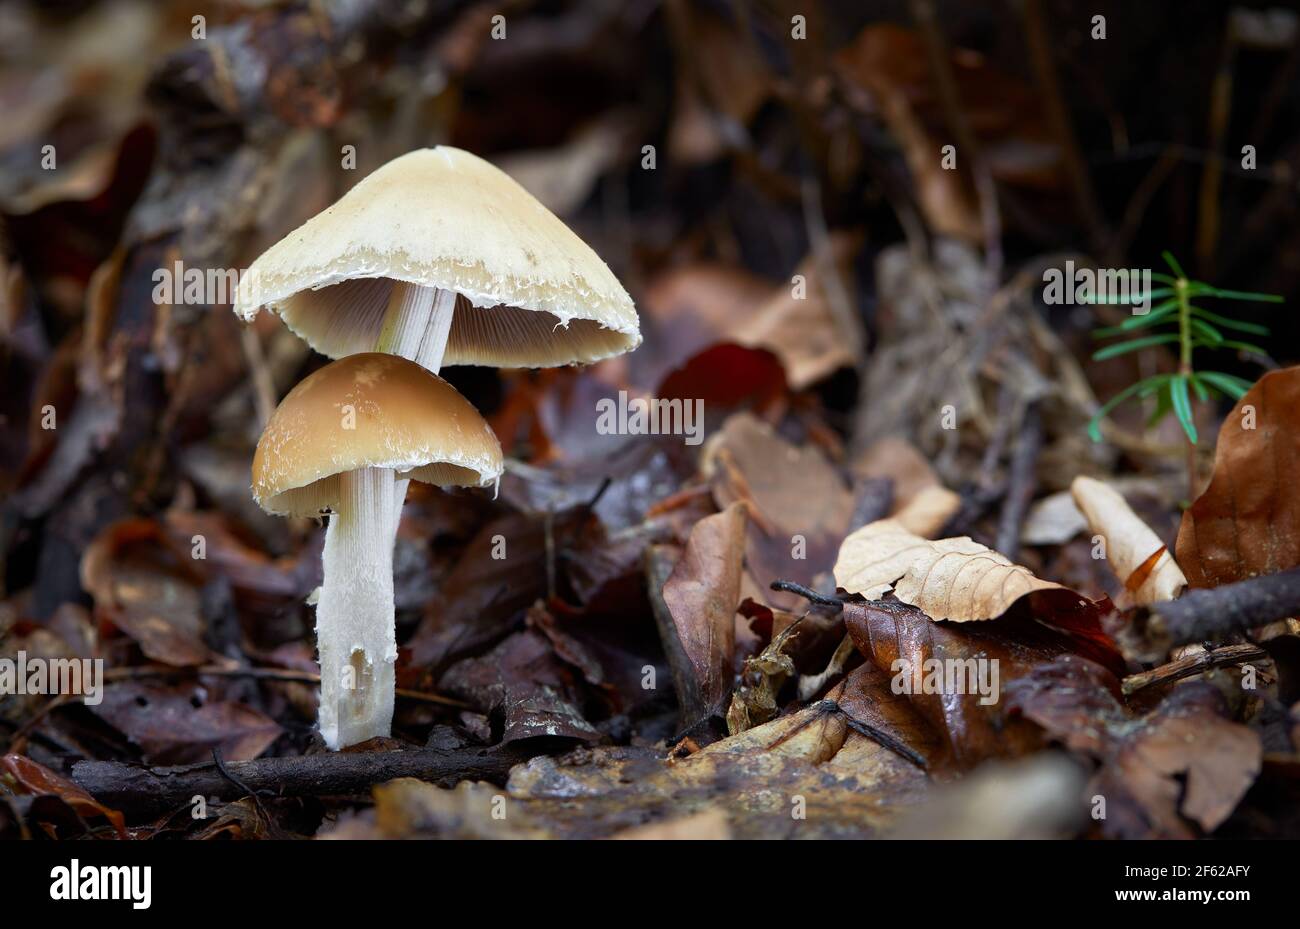 A fragile mushroom from the forests of Central Europe Stock Photo